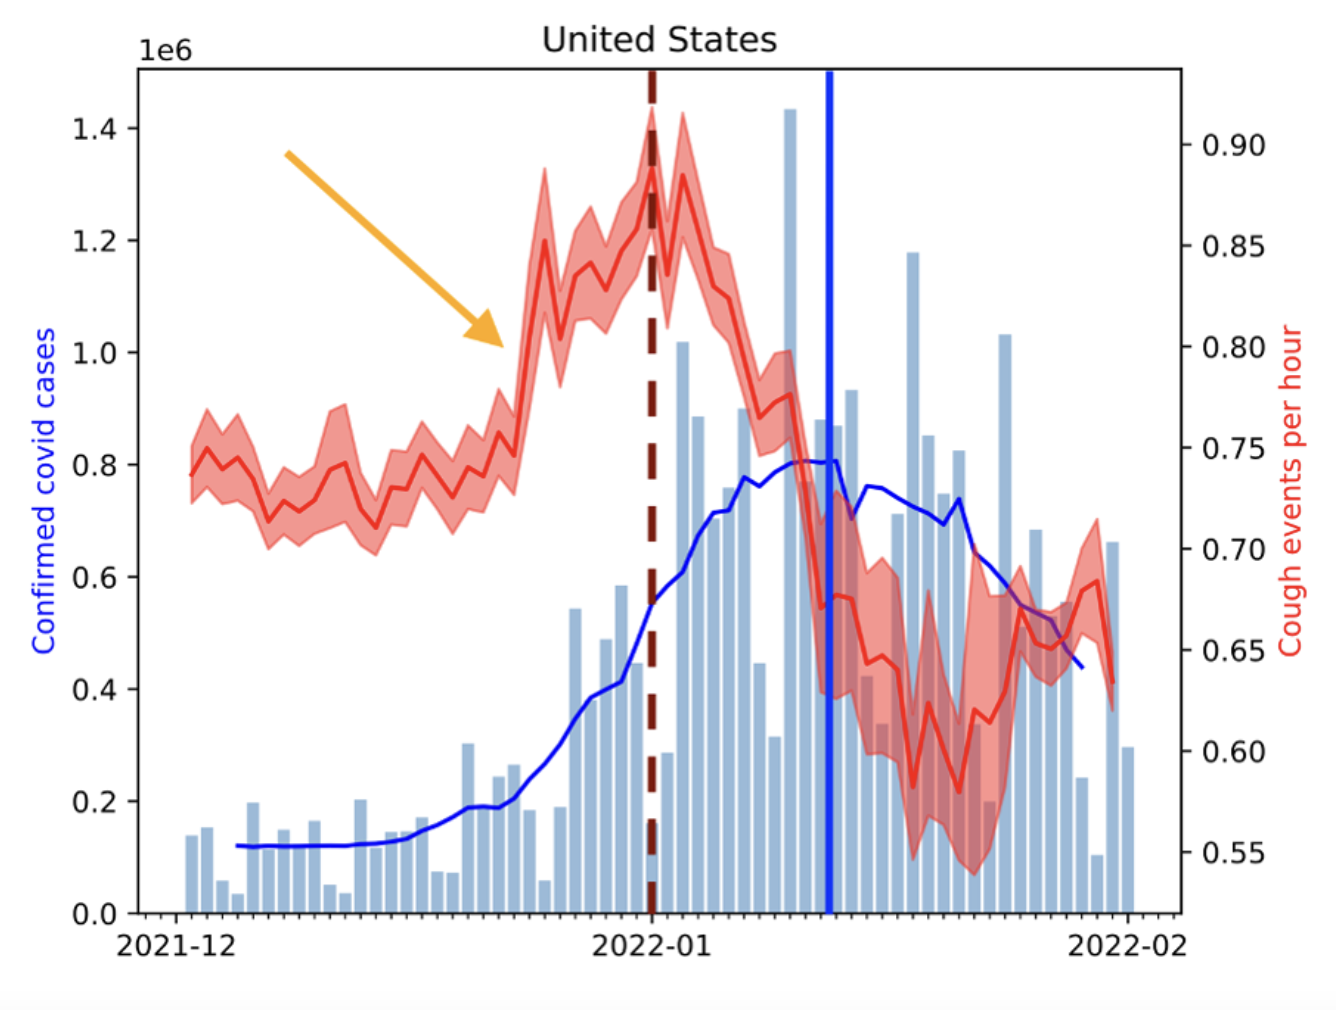 Sleep Cycle coughing data and confirmed Omicron cases in the United States.